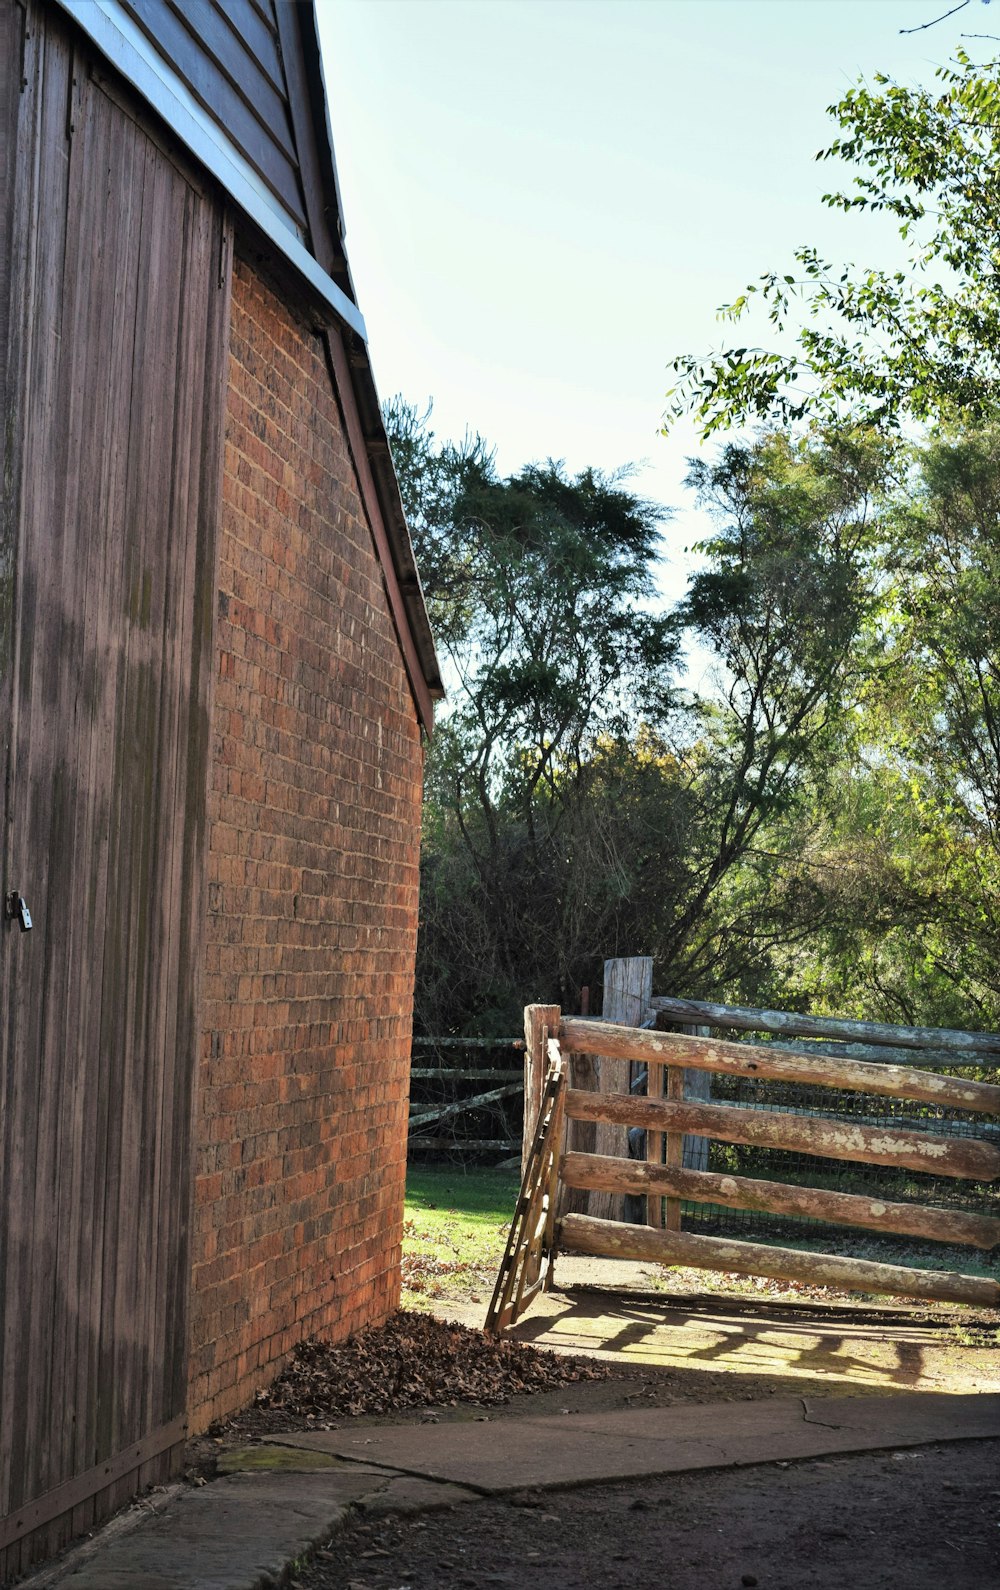 a wooden fence next to a brick building